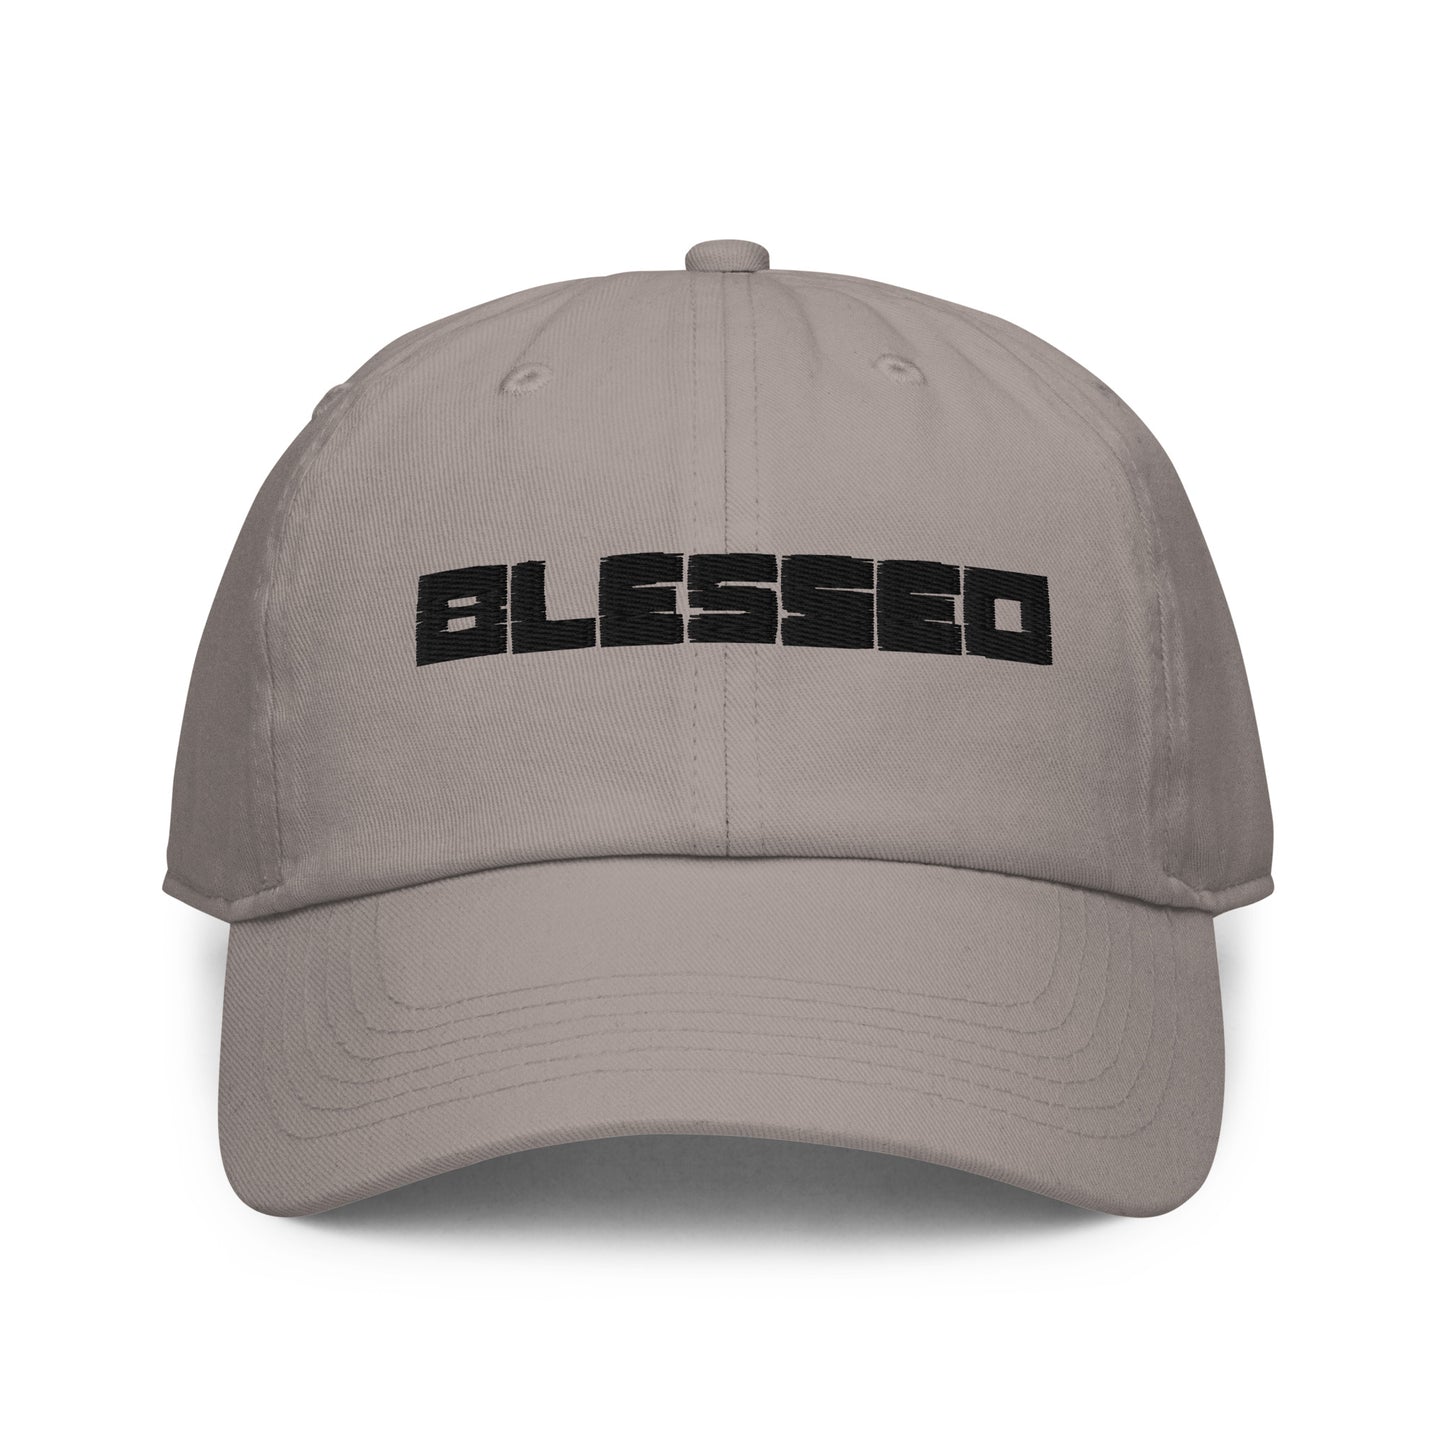 Blessed Fitted baseball cap